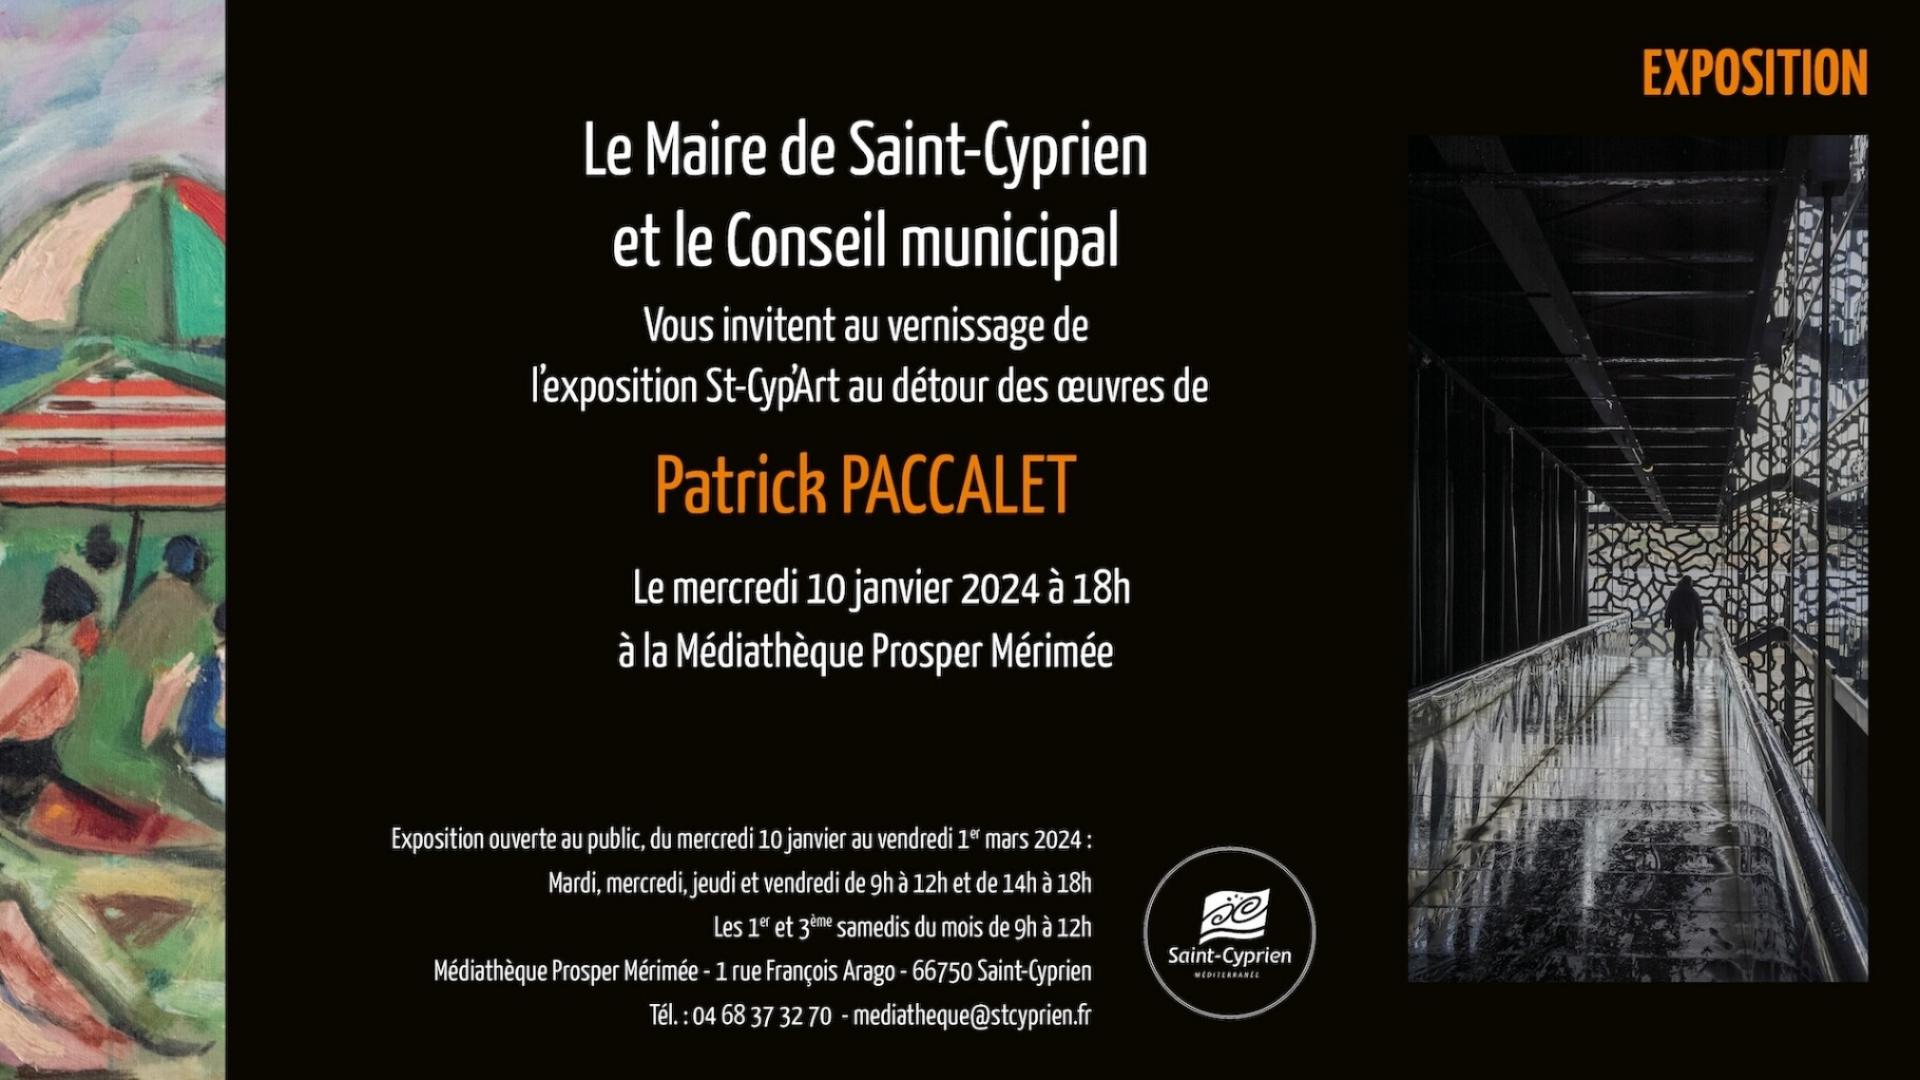 EXPOSITION ST-CYP'ART PATRICK PACCALET